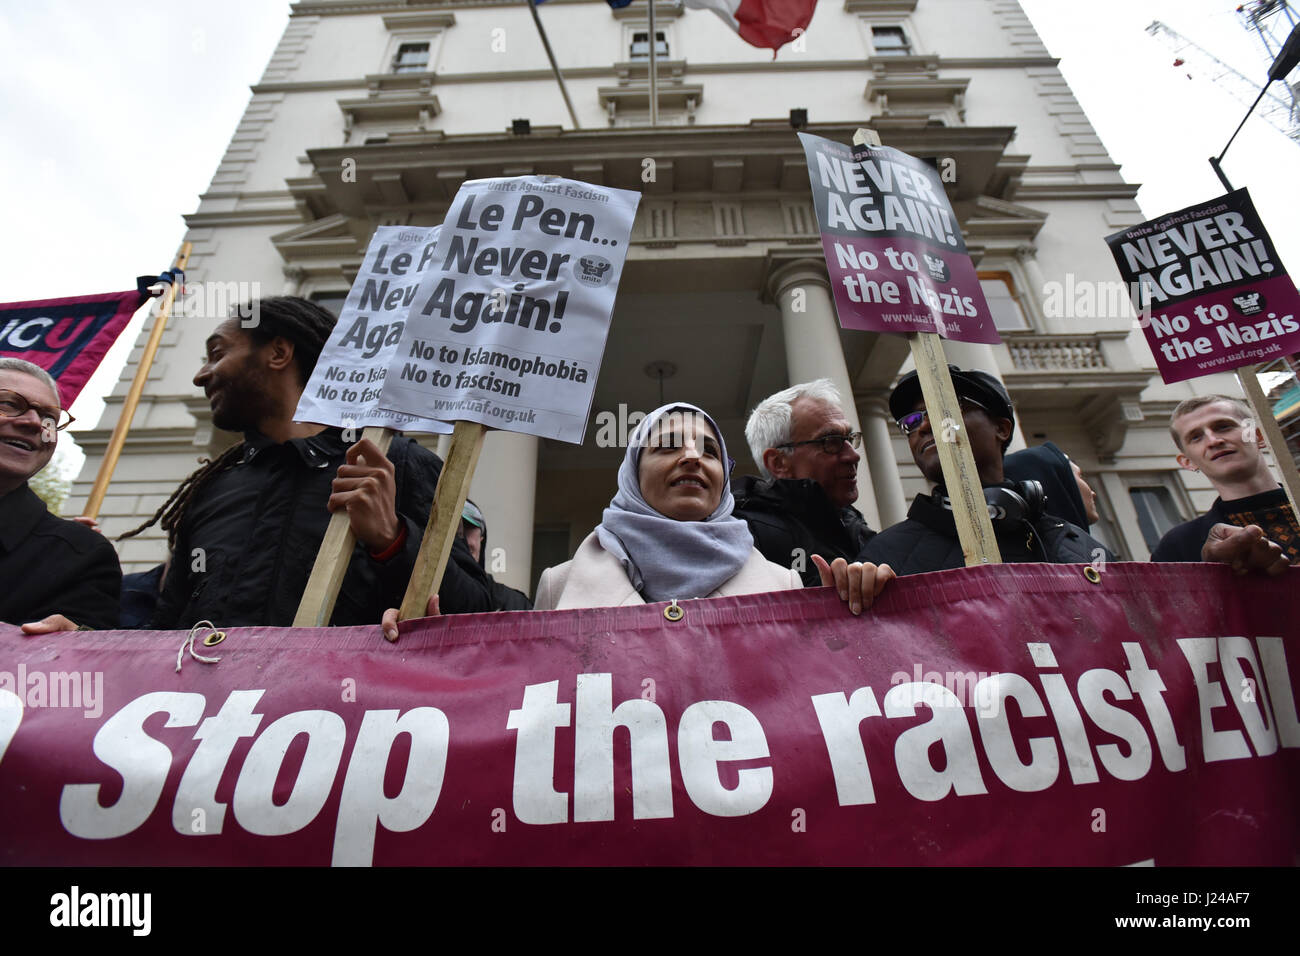 Knightsbridge, London, UK. 24th April 2017. A group protest outside the French embassy against Marine Le Pen and the 'rise of fascism in Europe'. Credit: Matthew Chattle/Alamy Live News Stock Photo